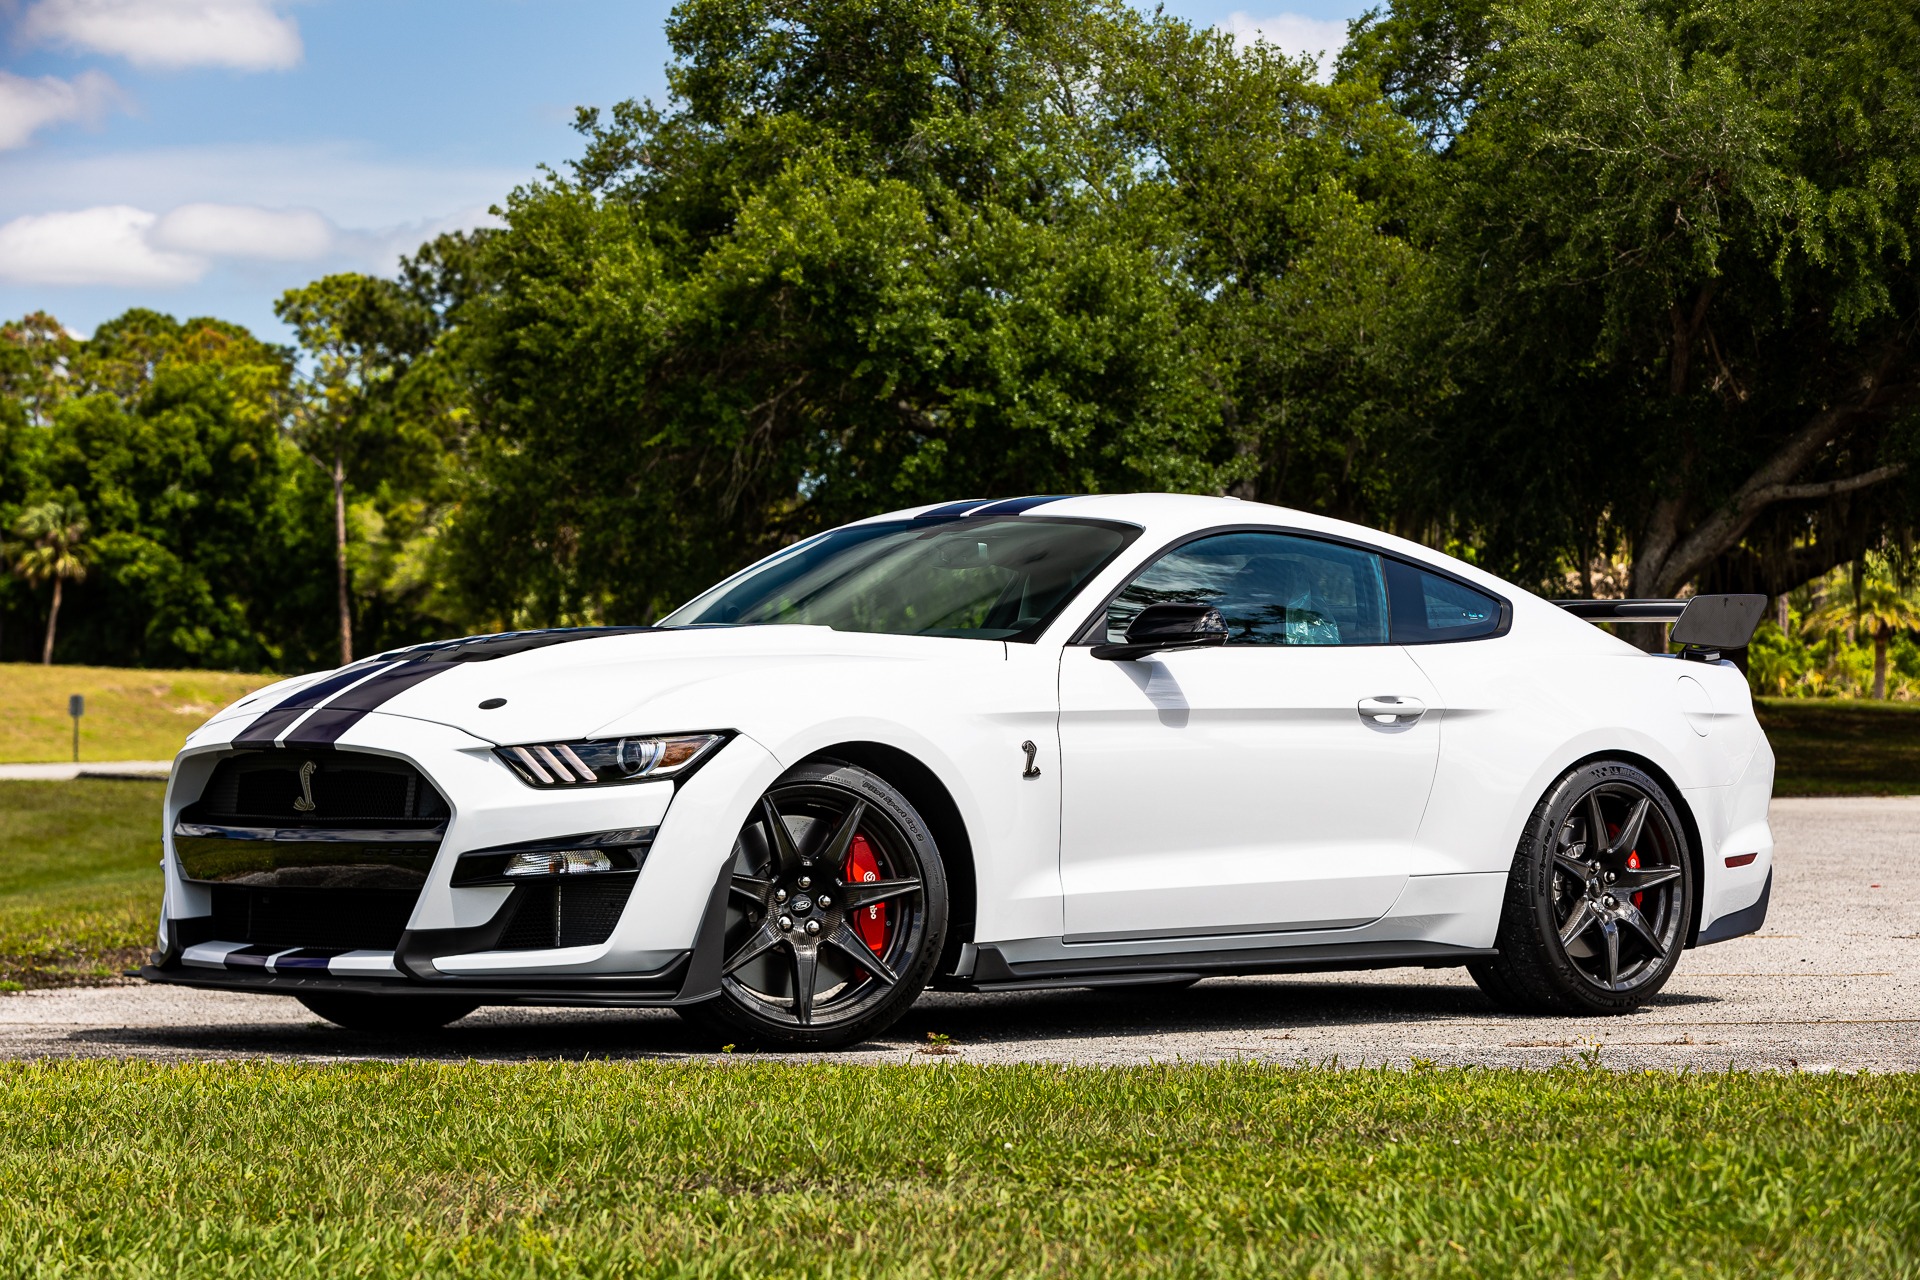 Used 2020 Ford Mustang Shelby GT500 Golden Ticket for sale $119,880 at McLaren Orlando LLC in Titusville FL 32780 1